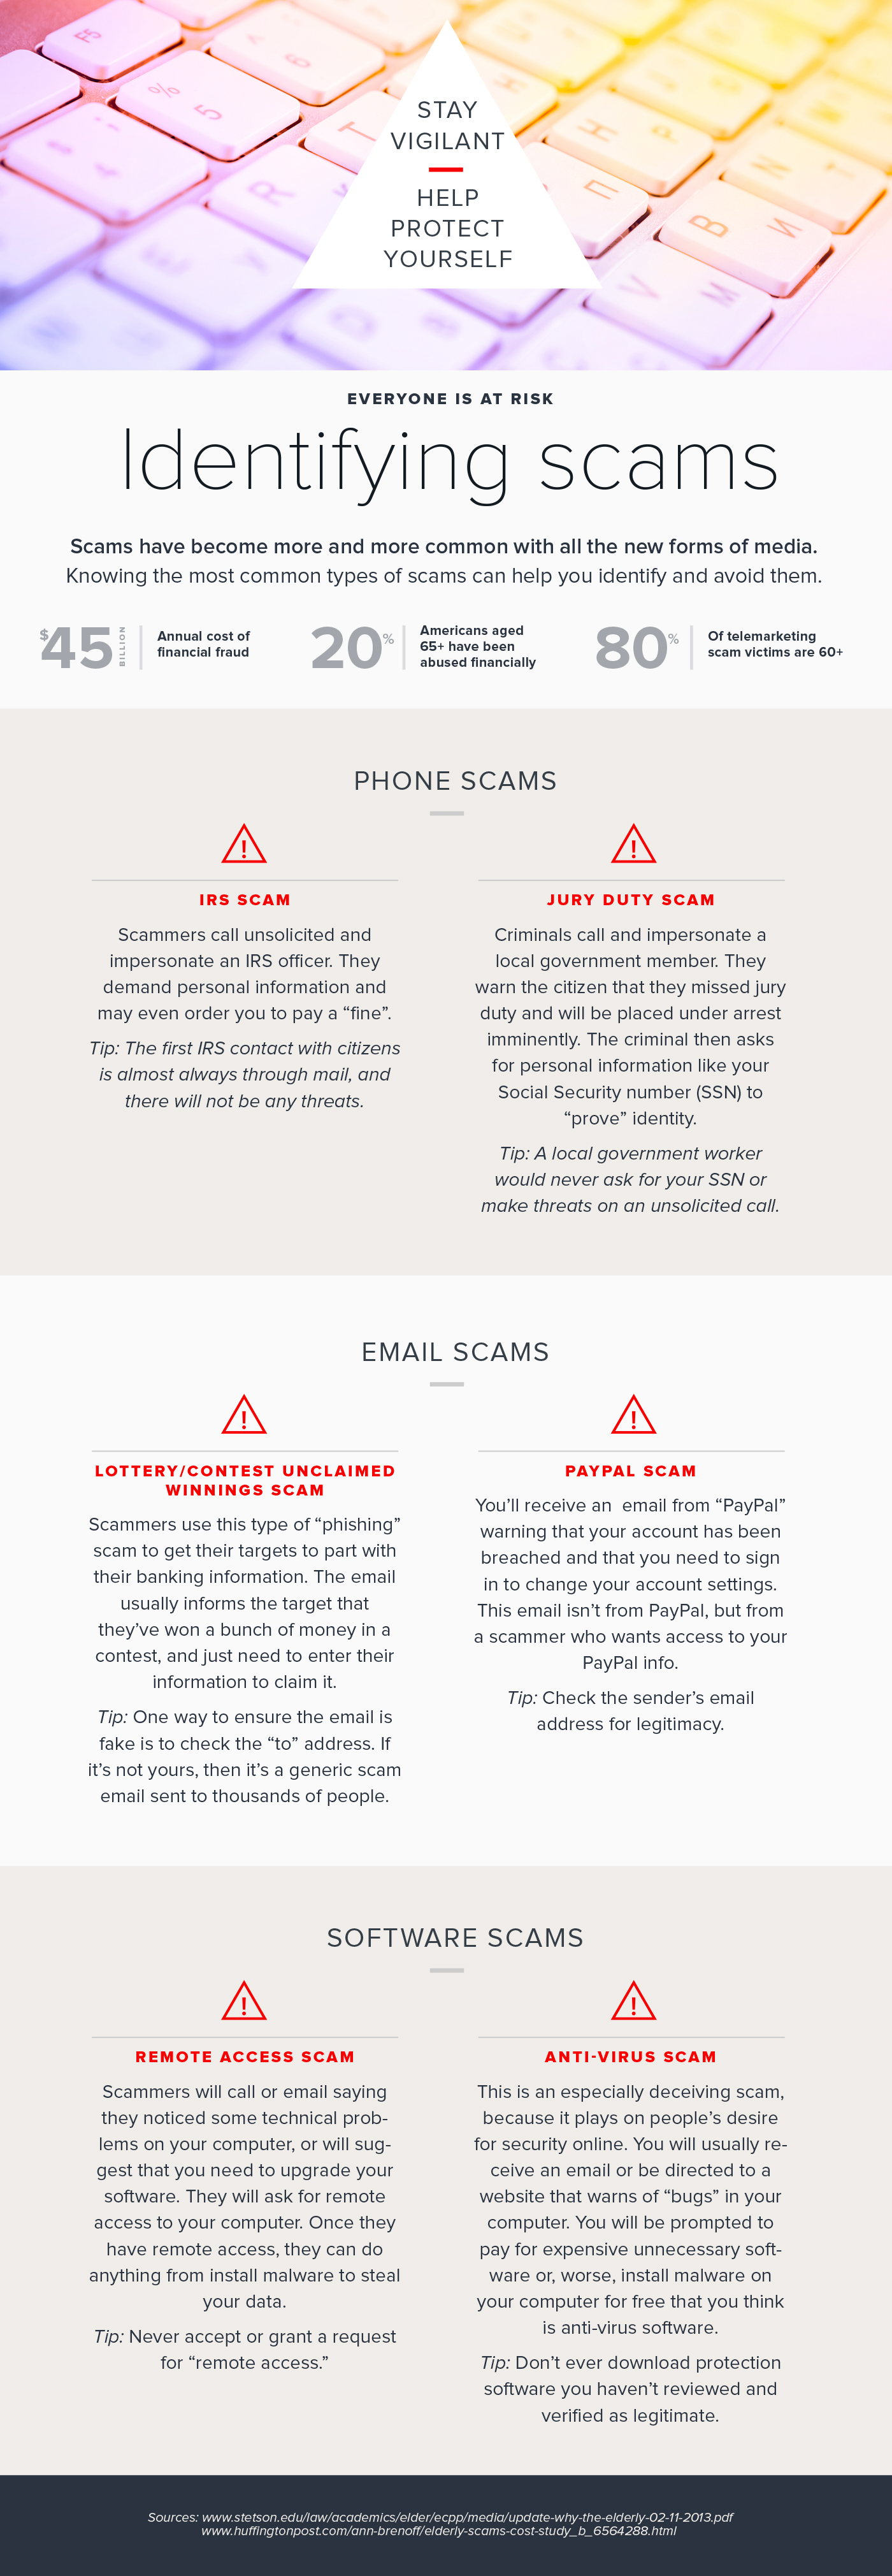 Senior scams - the most common types infographic